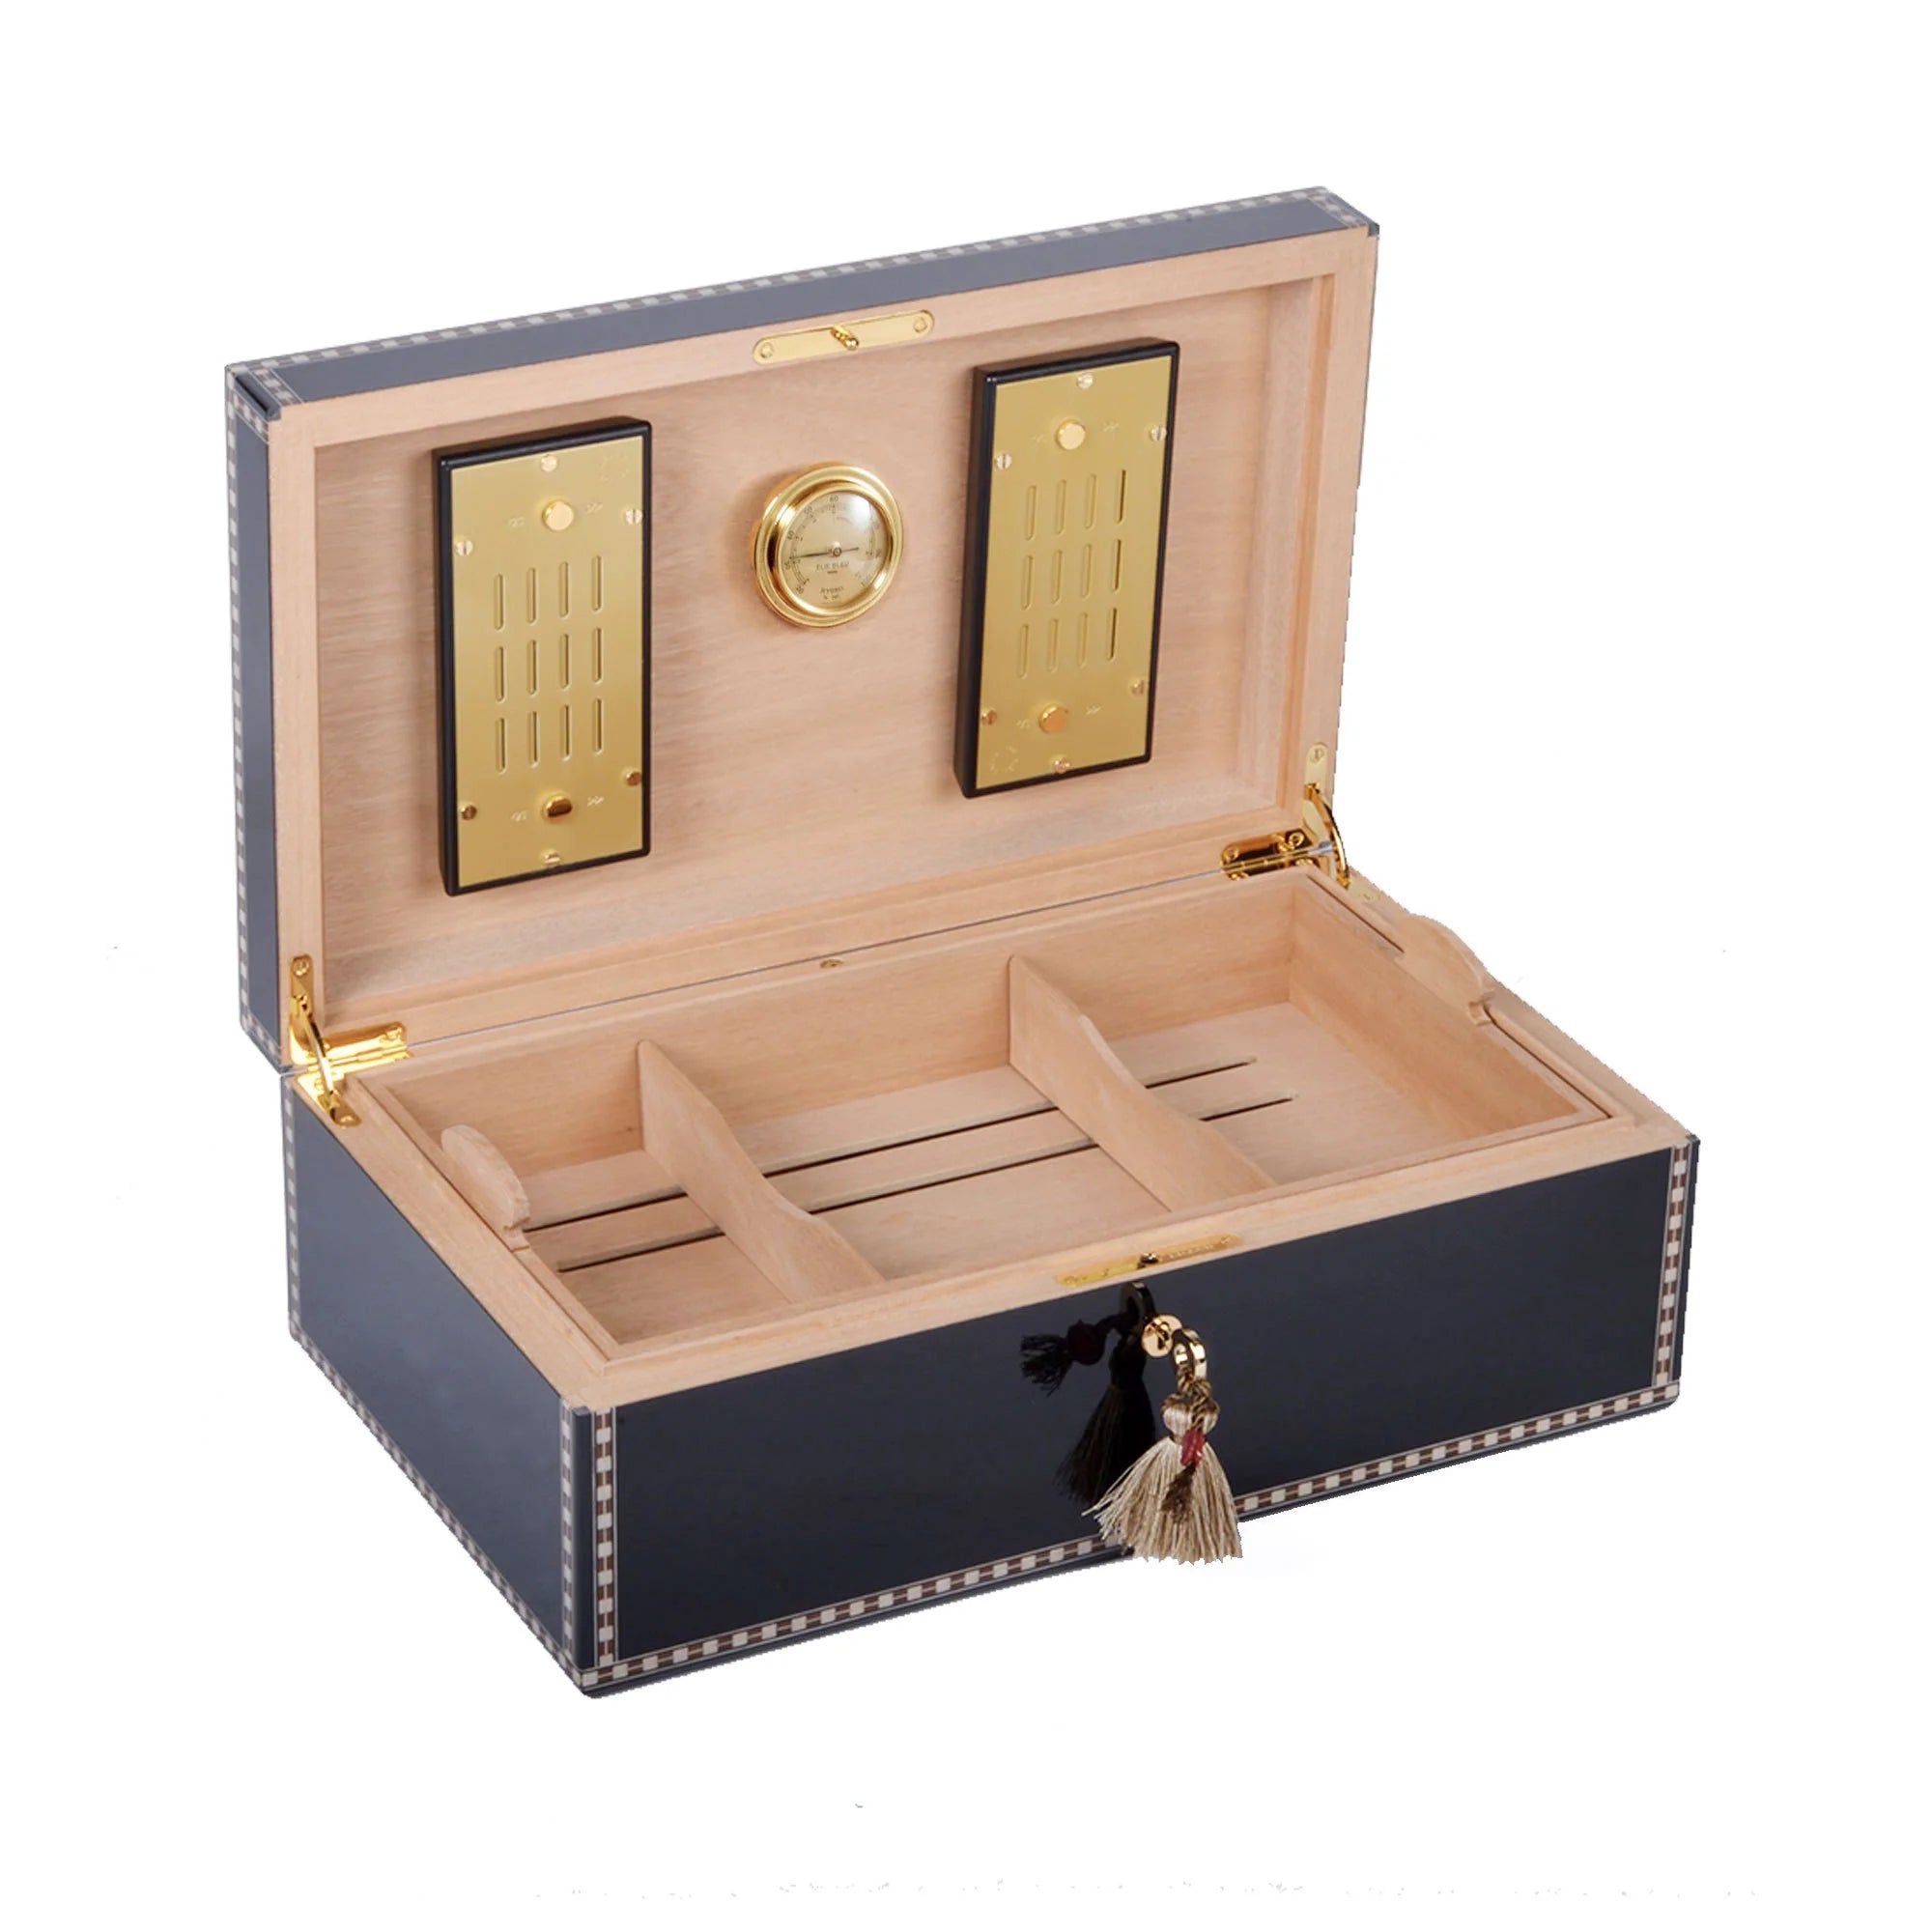 An Elie Bleu Black Sycamore "Medals" humidor adorned with a tassel, designed to store cigars.